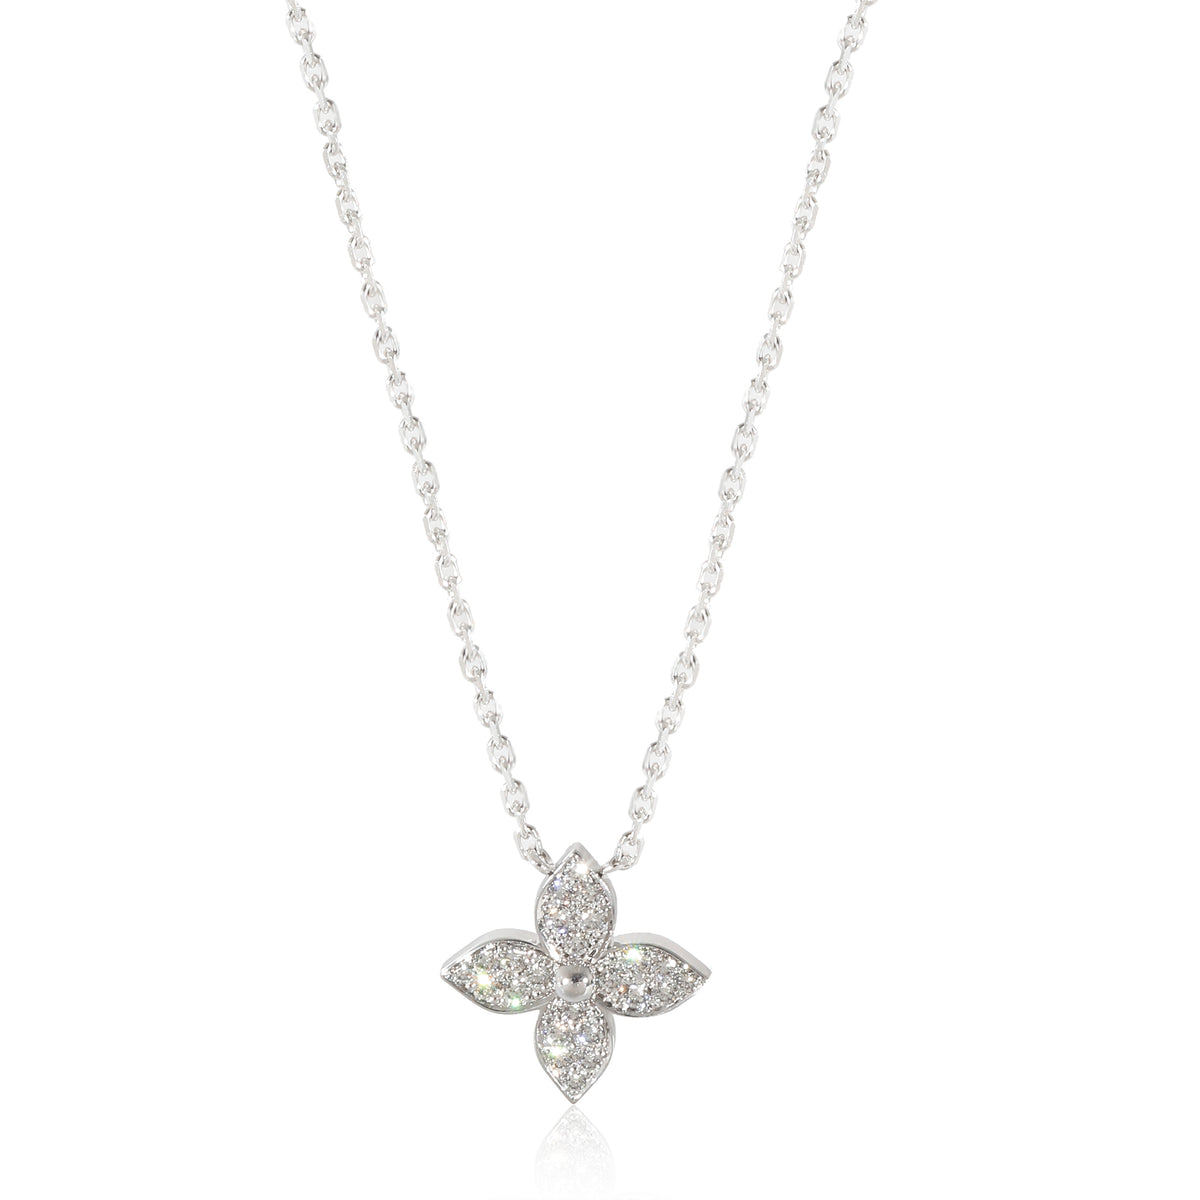 Louis Vuitton Idylle Blossom Necklace in 18K White Gold 0.2 ctw - White Gold / Necklace | Pre-owned & Certified | used Second Hand | Womens